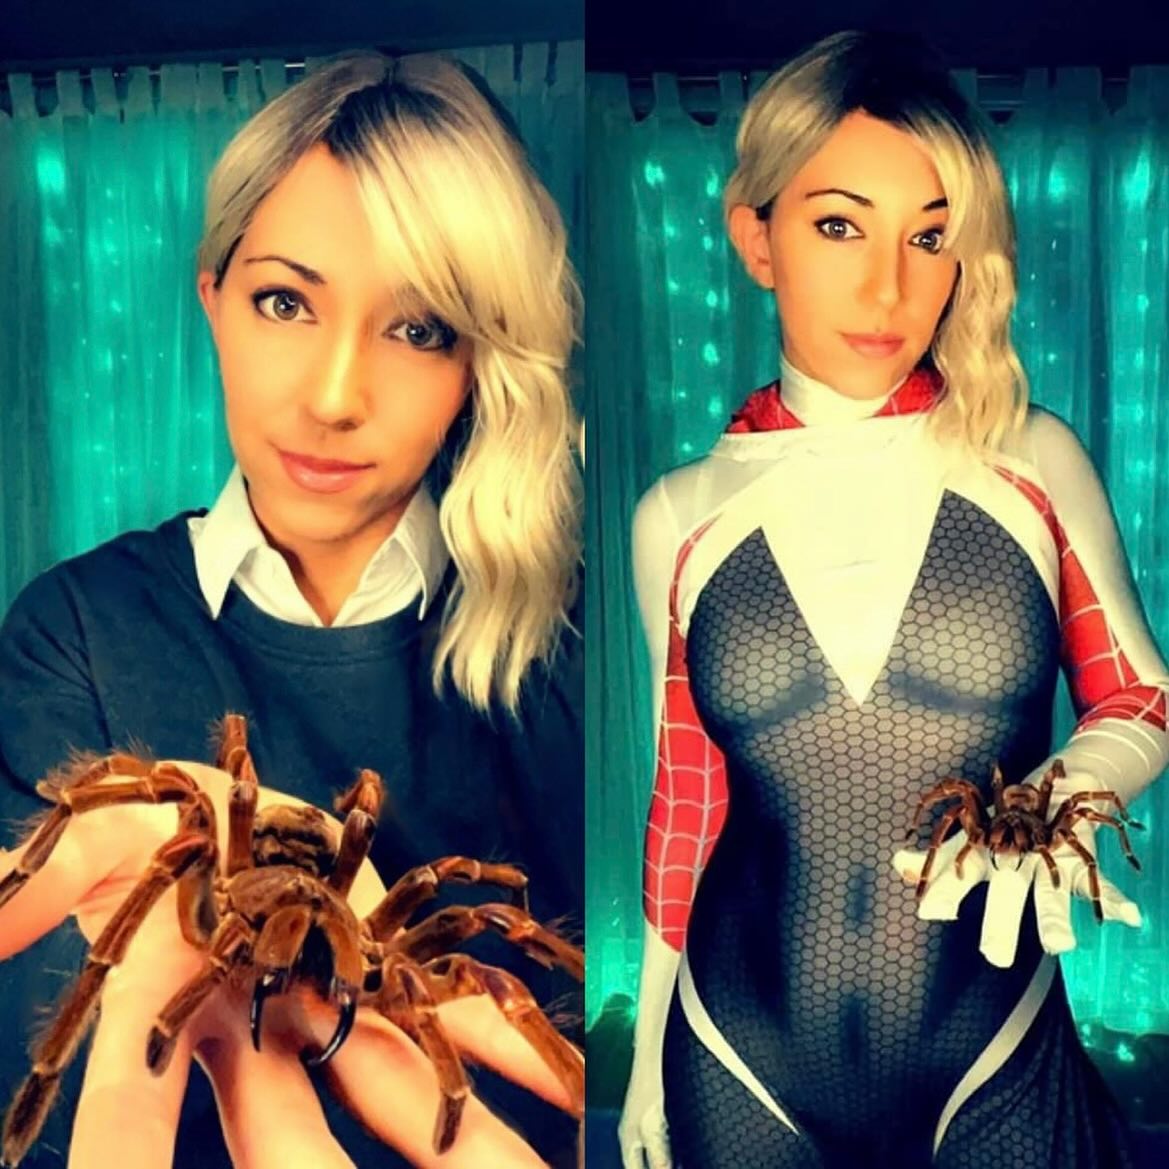 My 12th most *liked* cosplay, Spidergirl Gwen!  She’s one of my favorites!  Did you know I also have a creepy hobby… tarantula taxidermy! 

Streaming starting in 12 days!! Please subscribe to my YouTube or Twitch channel and come say hi!! Link in bio!
.
.
.
.
.
.
.
.
.
#cosplay #twitchstreamer #twitch #twitchgirl #egirl #gamergirl #girlgamer #twitchtv #ttv #streamergirl #girlstreamer #pcplayer #animegirl #cosplaygirl #twitchaffiliate #twitchgirls #nerdygirl #psycobia #marvel #spiderman #spidergwen #spidergirl #girl #tarantula #taxidermy #floridagirl